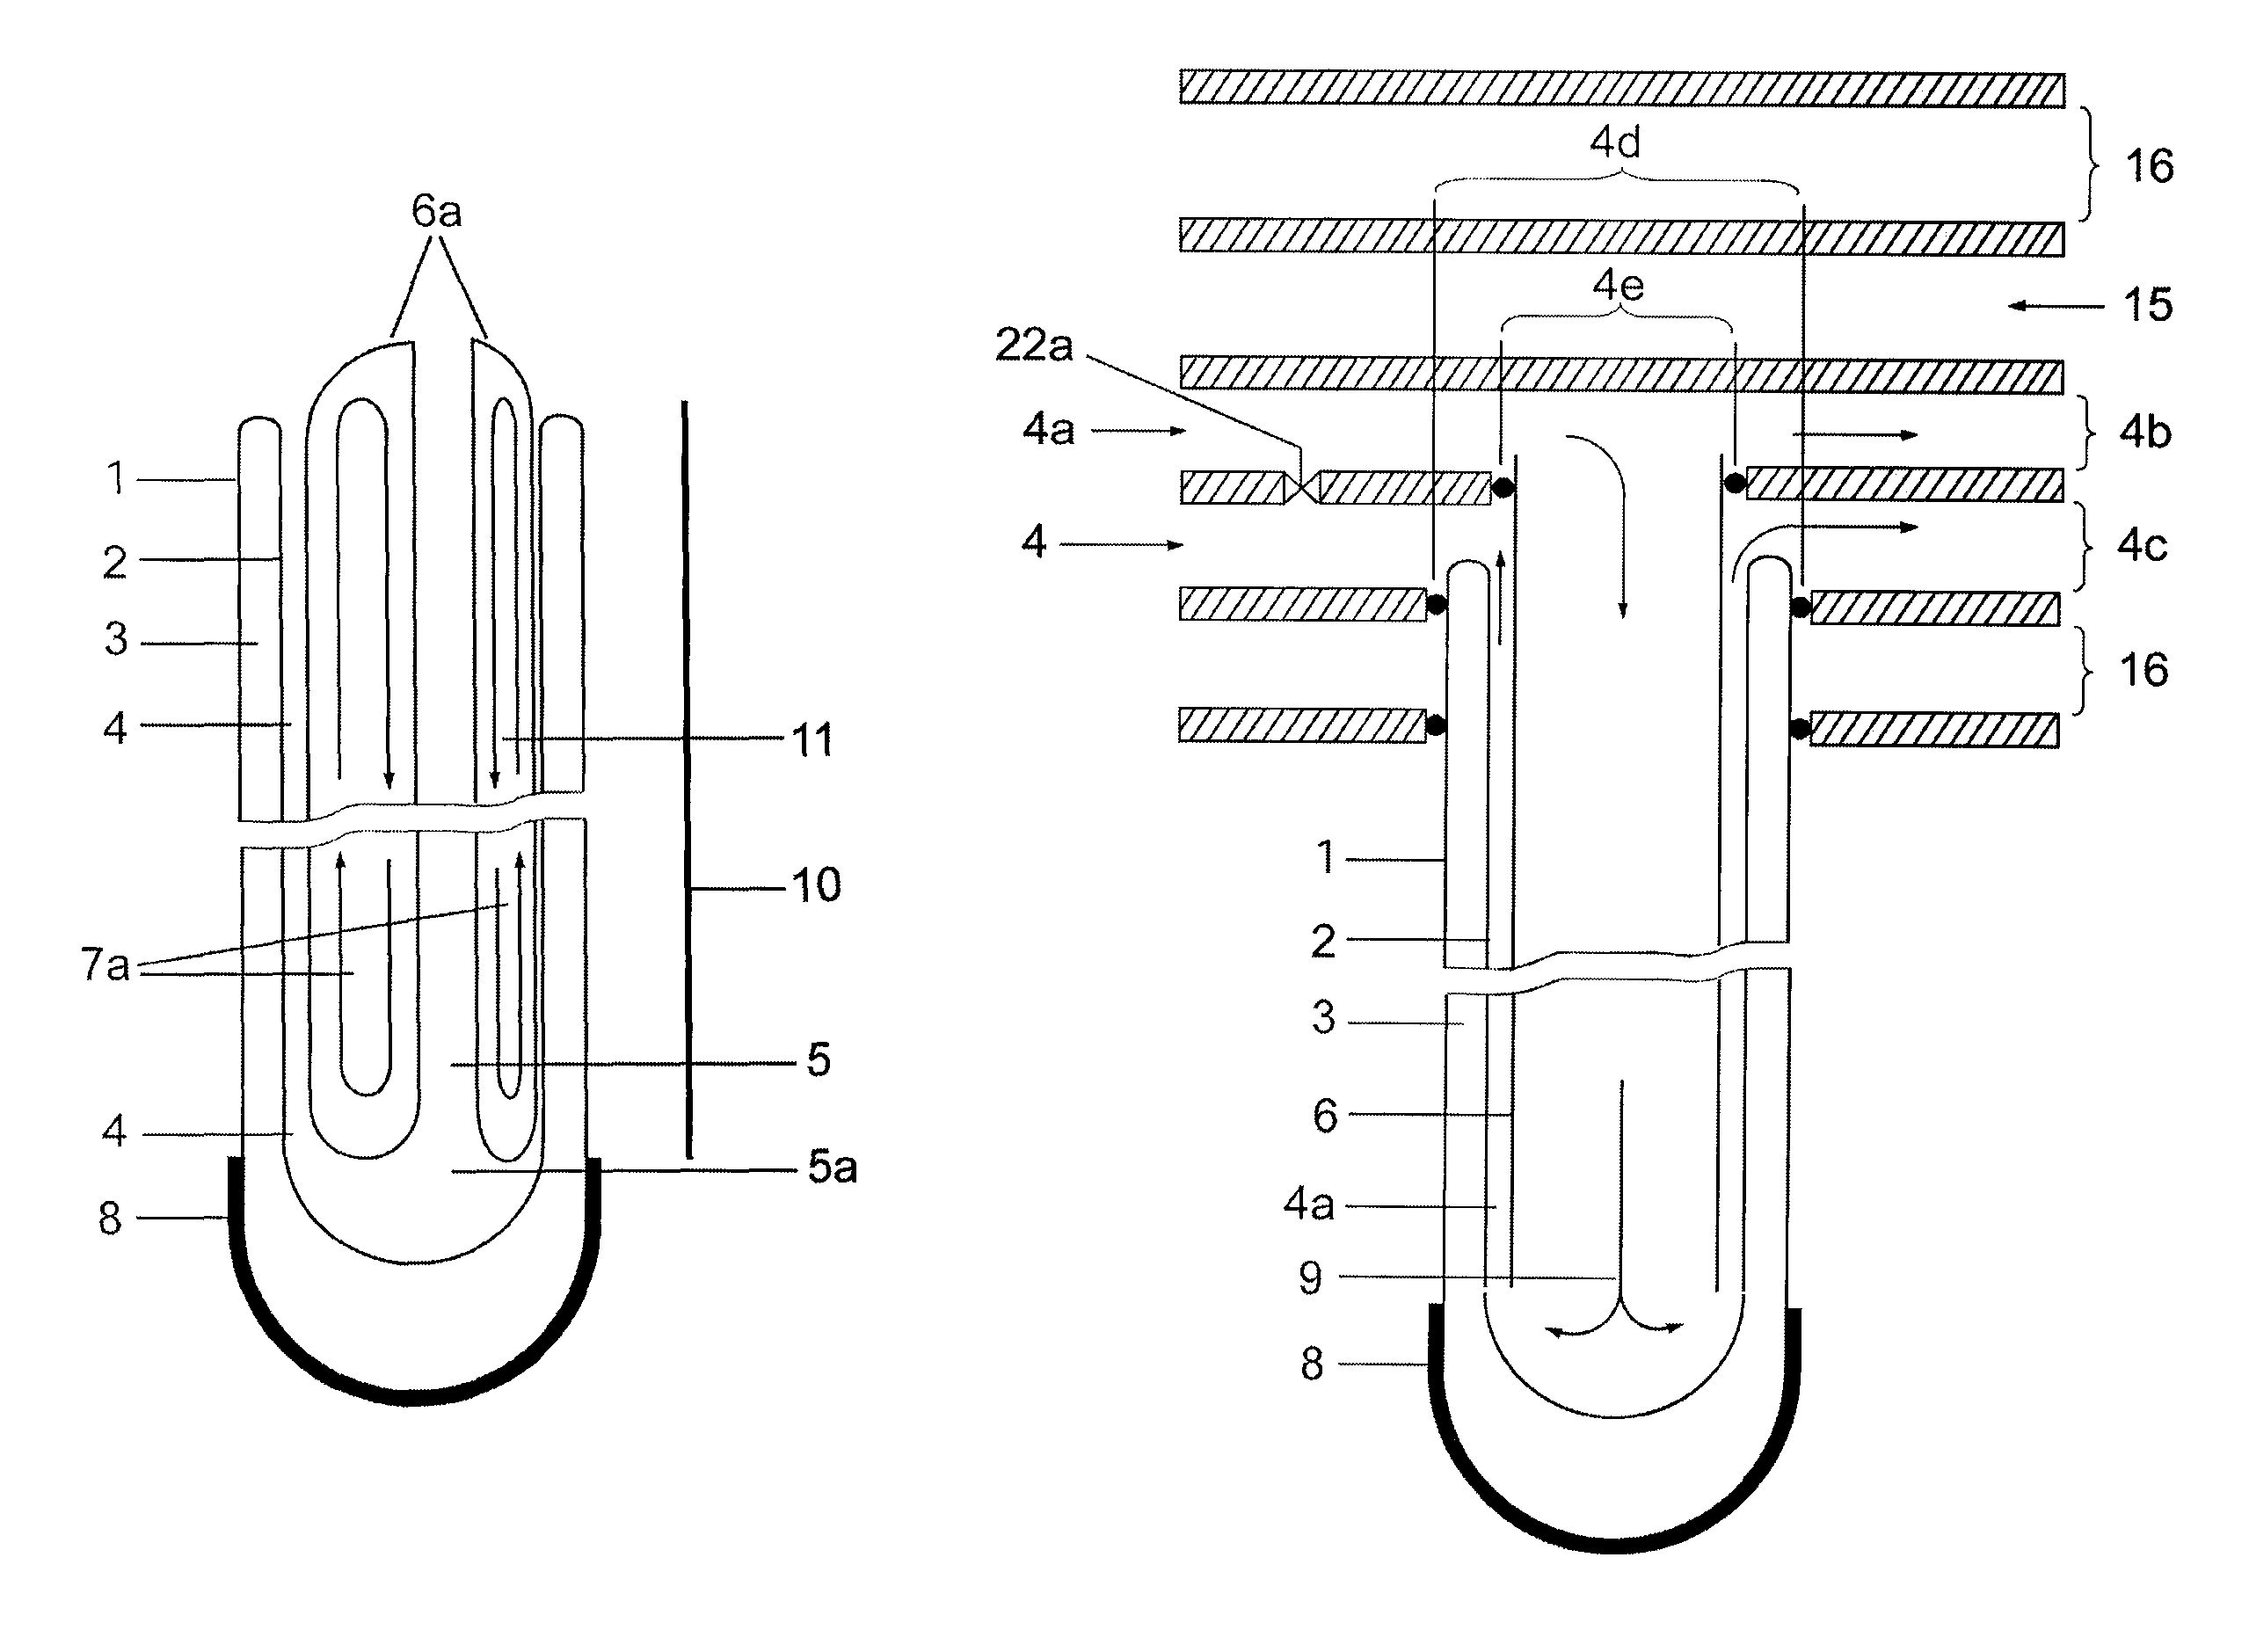 Tube collector with variable thermal conductivity of the coaxial tube